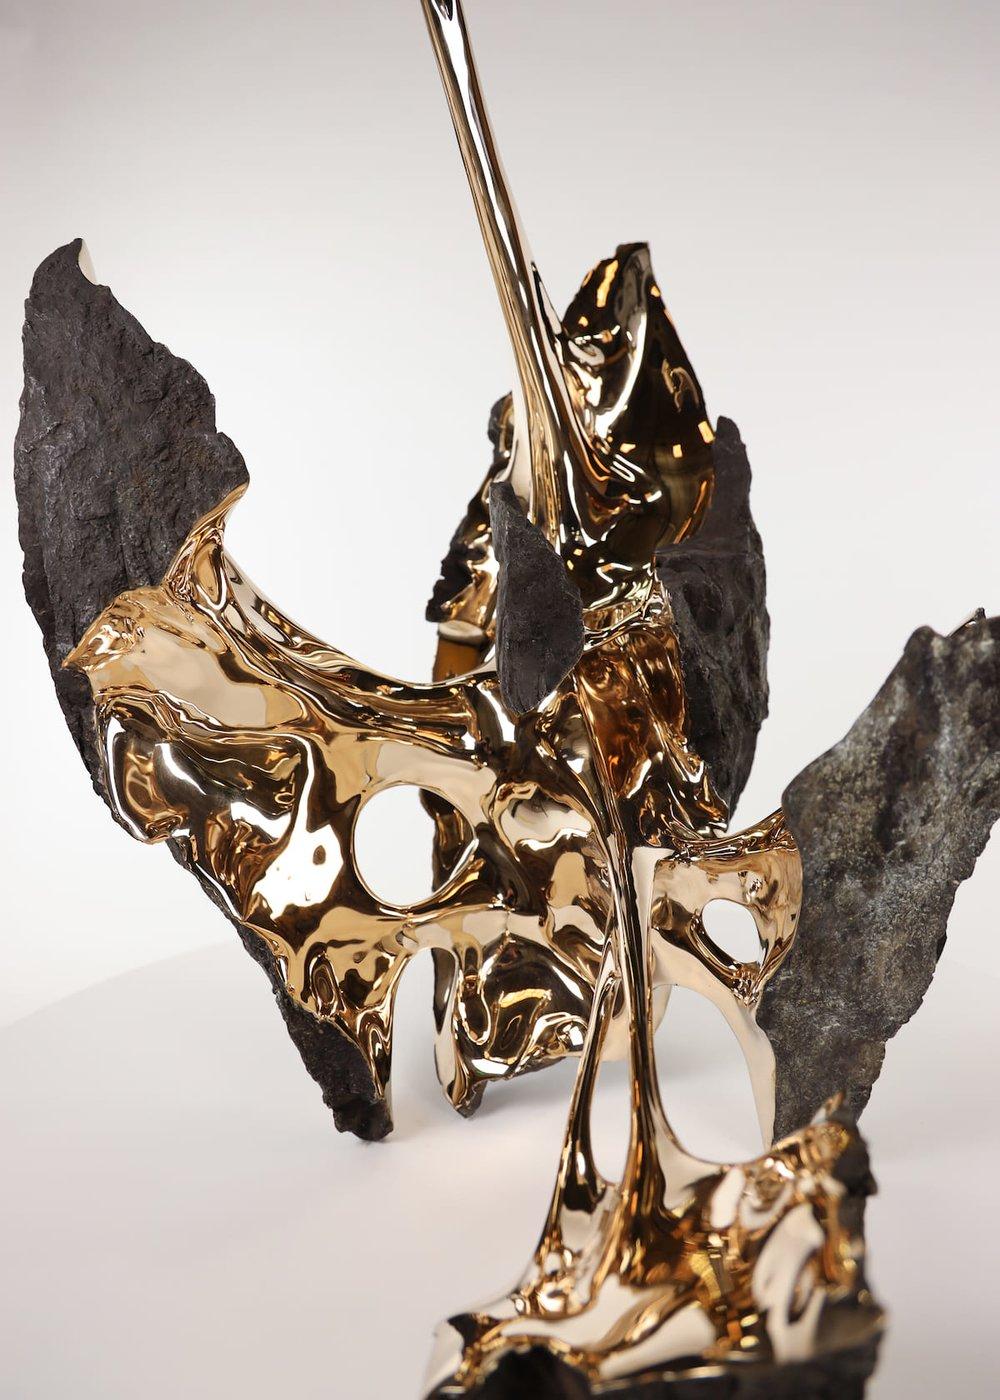 Serendipity by Romain Langlois - Gold tone polished bronze sculpture, abstract For Sale 1